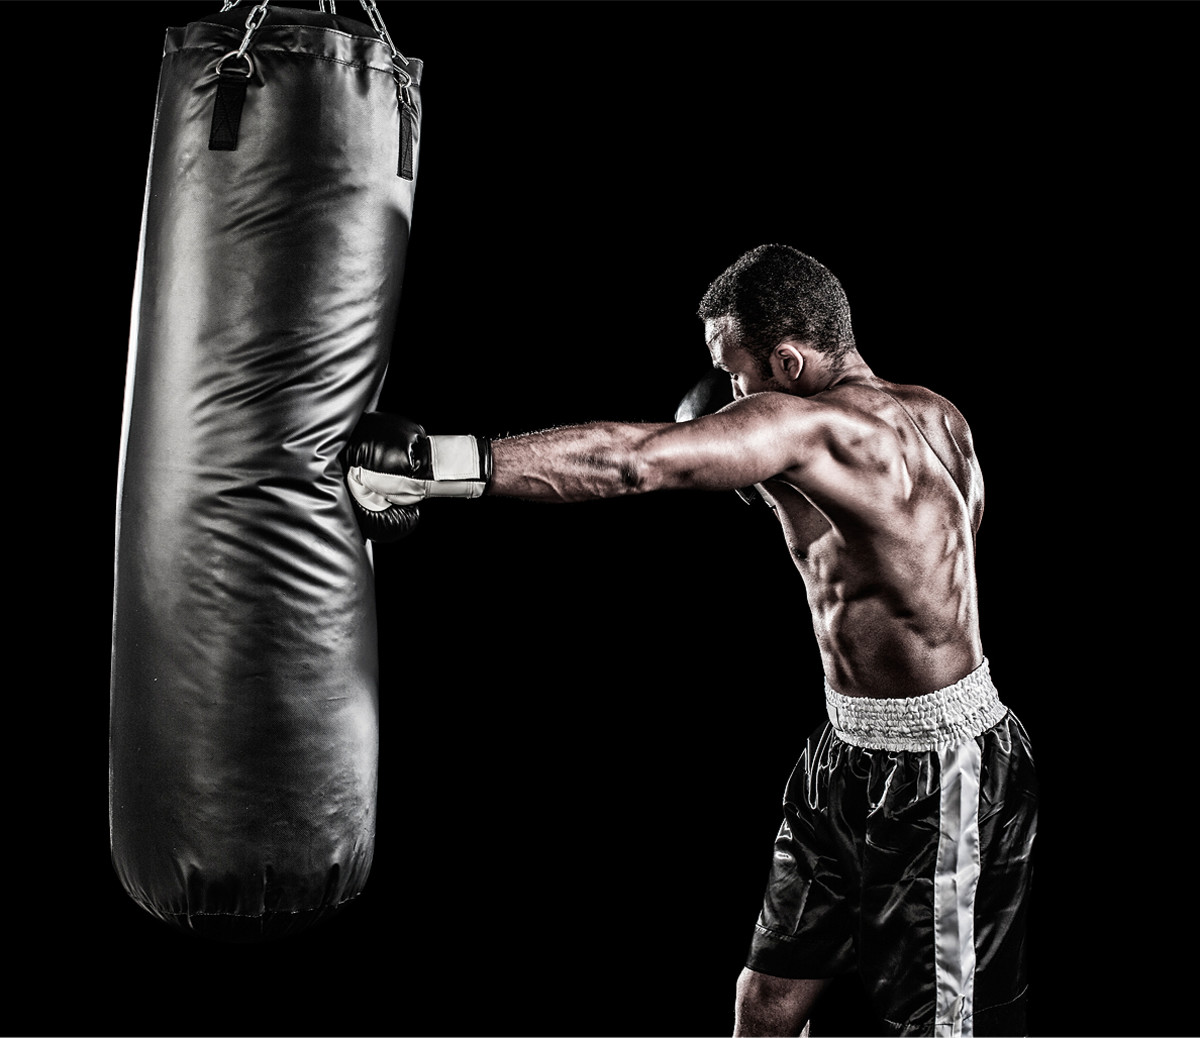 Cross Punch - A man performing a cross punch in a punching bag.